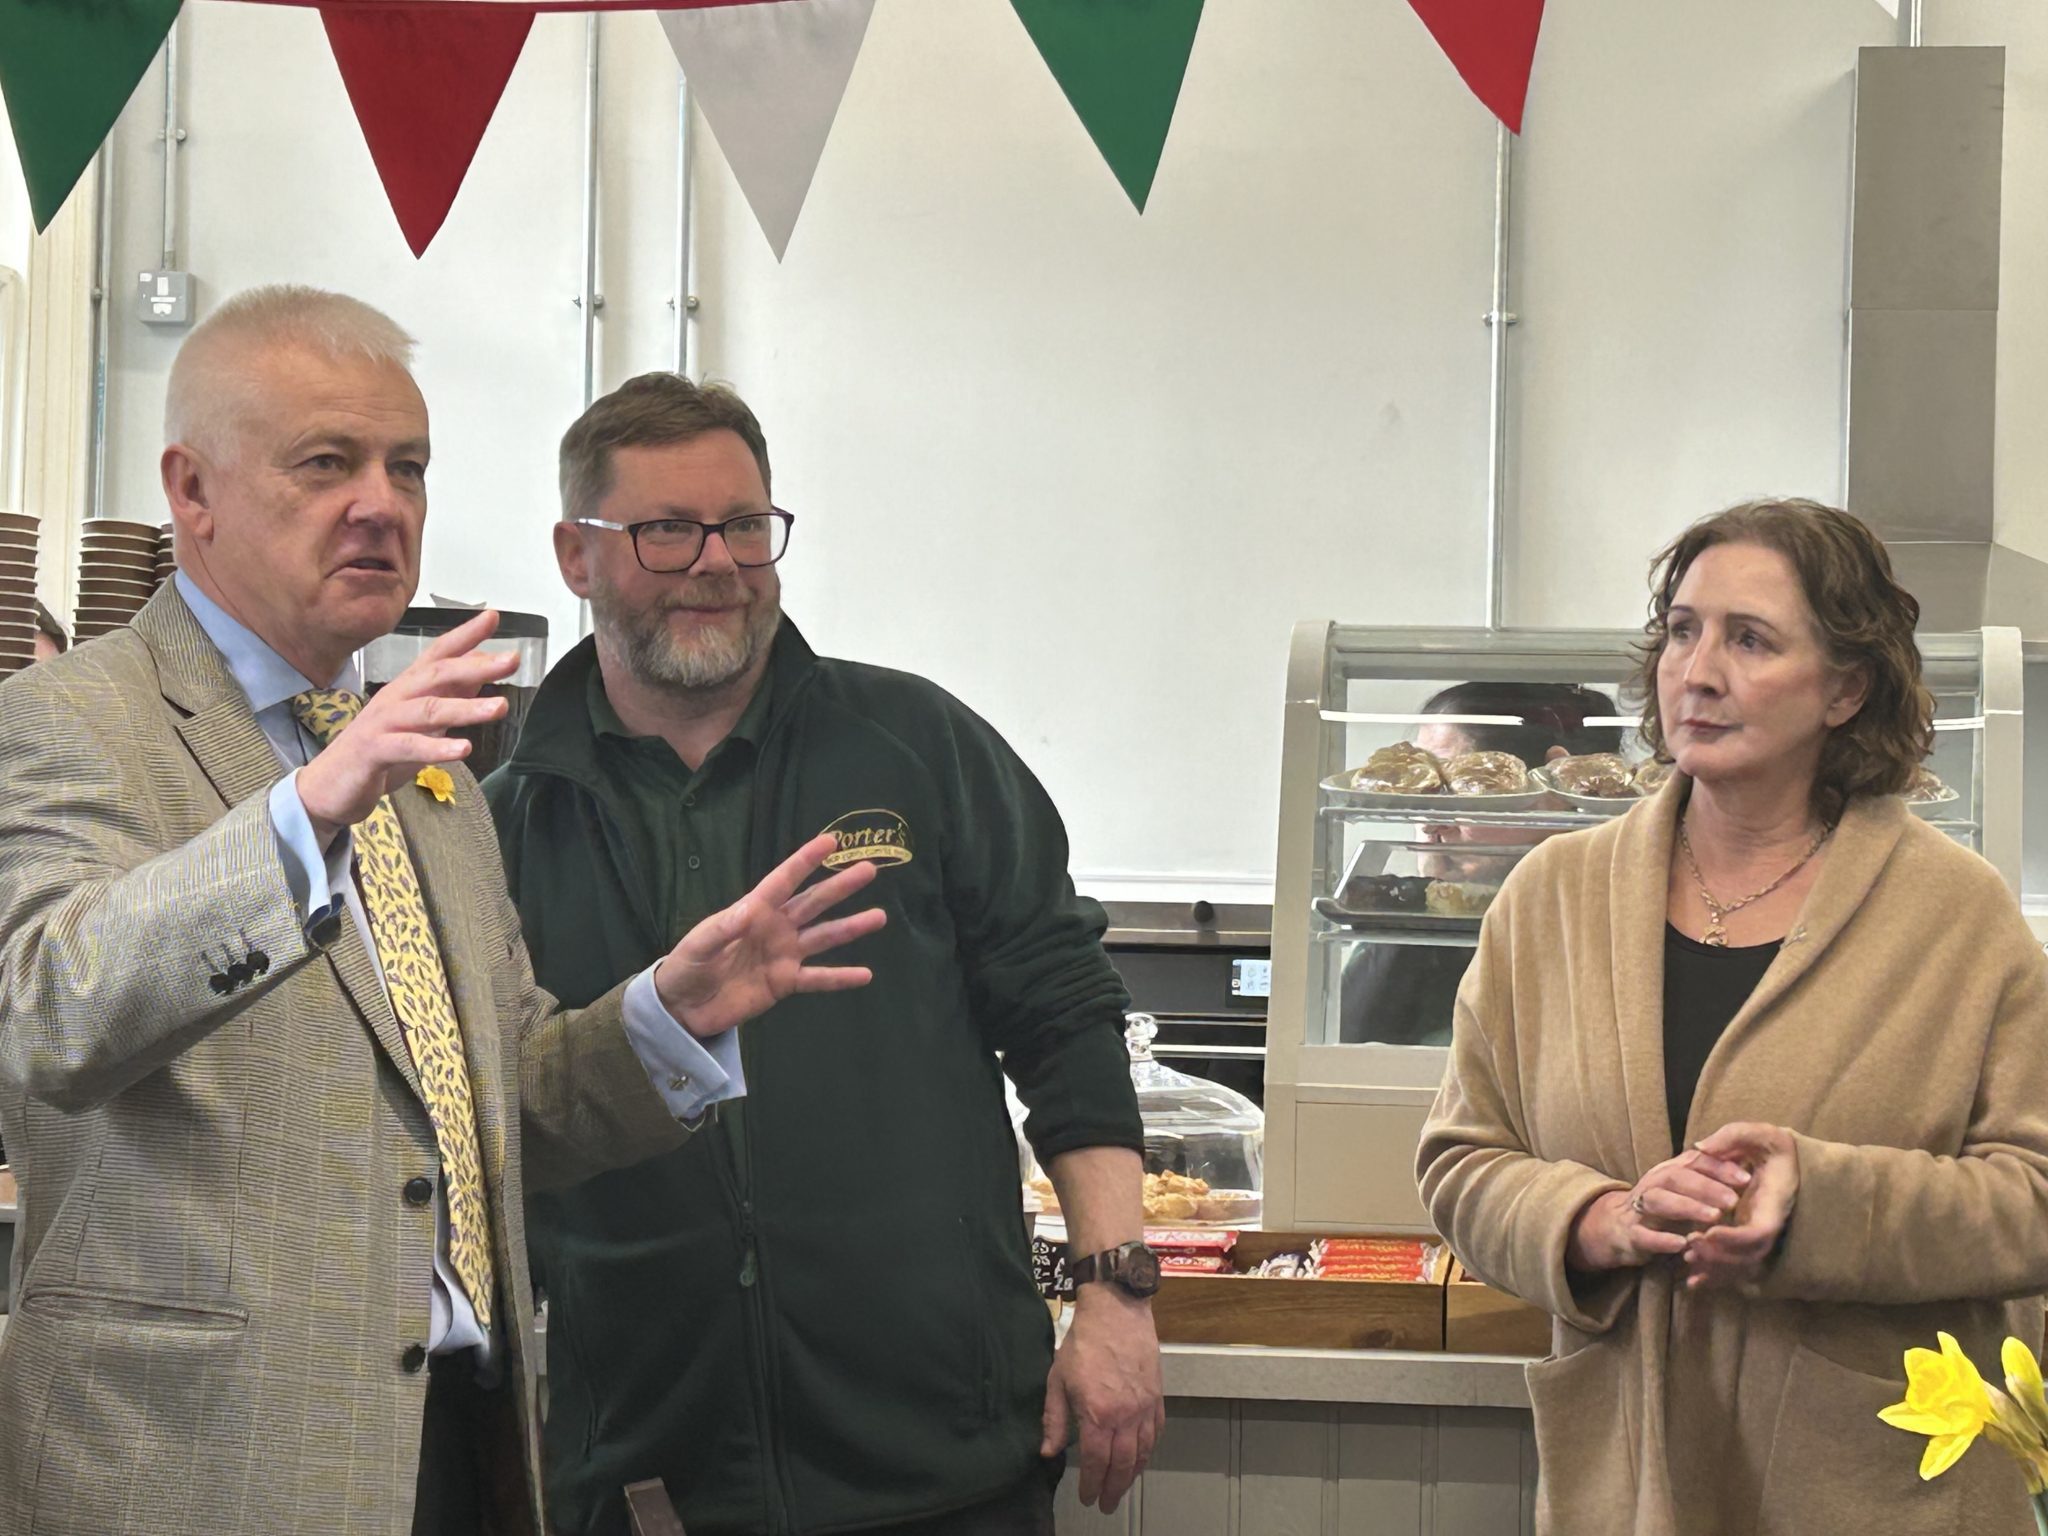 Three people standing in a cafe with one man speaking and gesturing, another listening attentively, and a woman looking on calmly, with red, white and green bunting in the background.